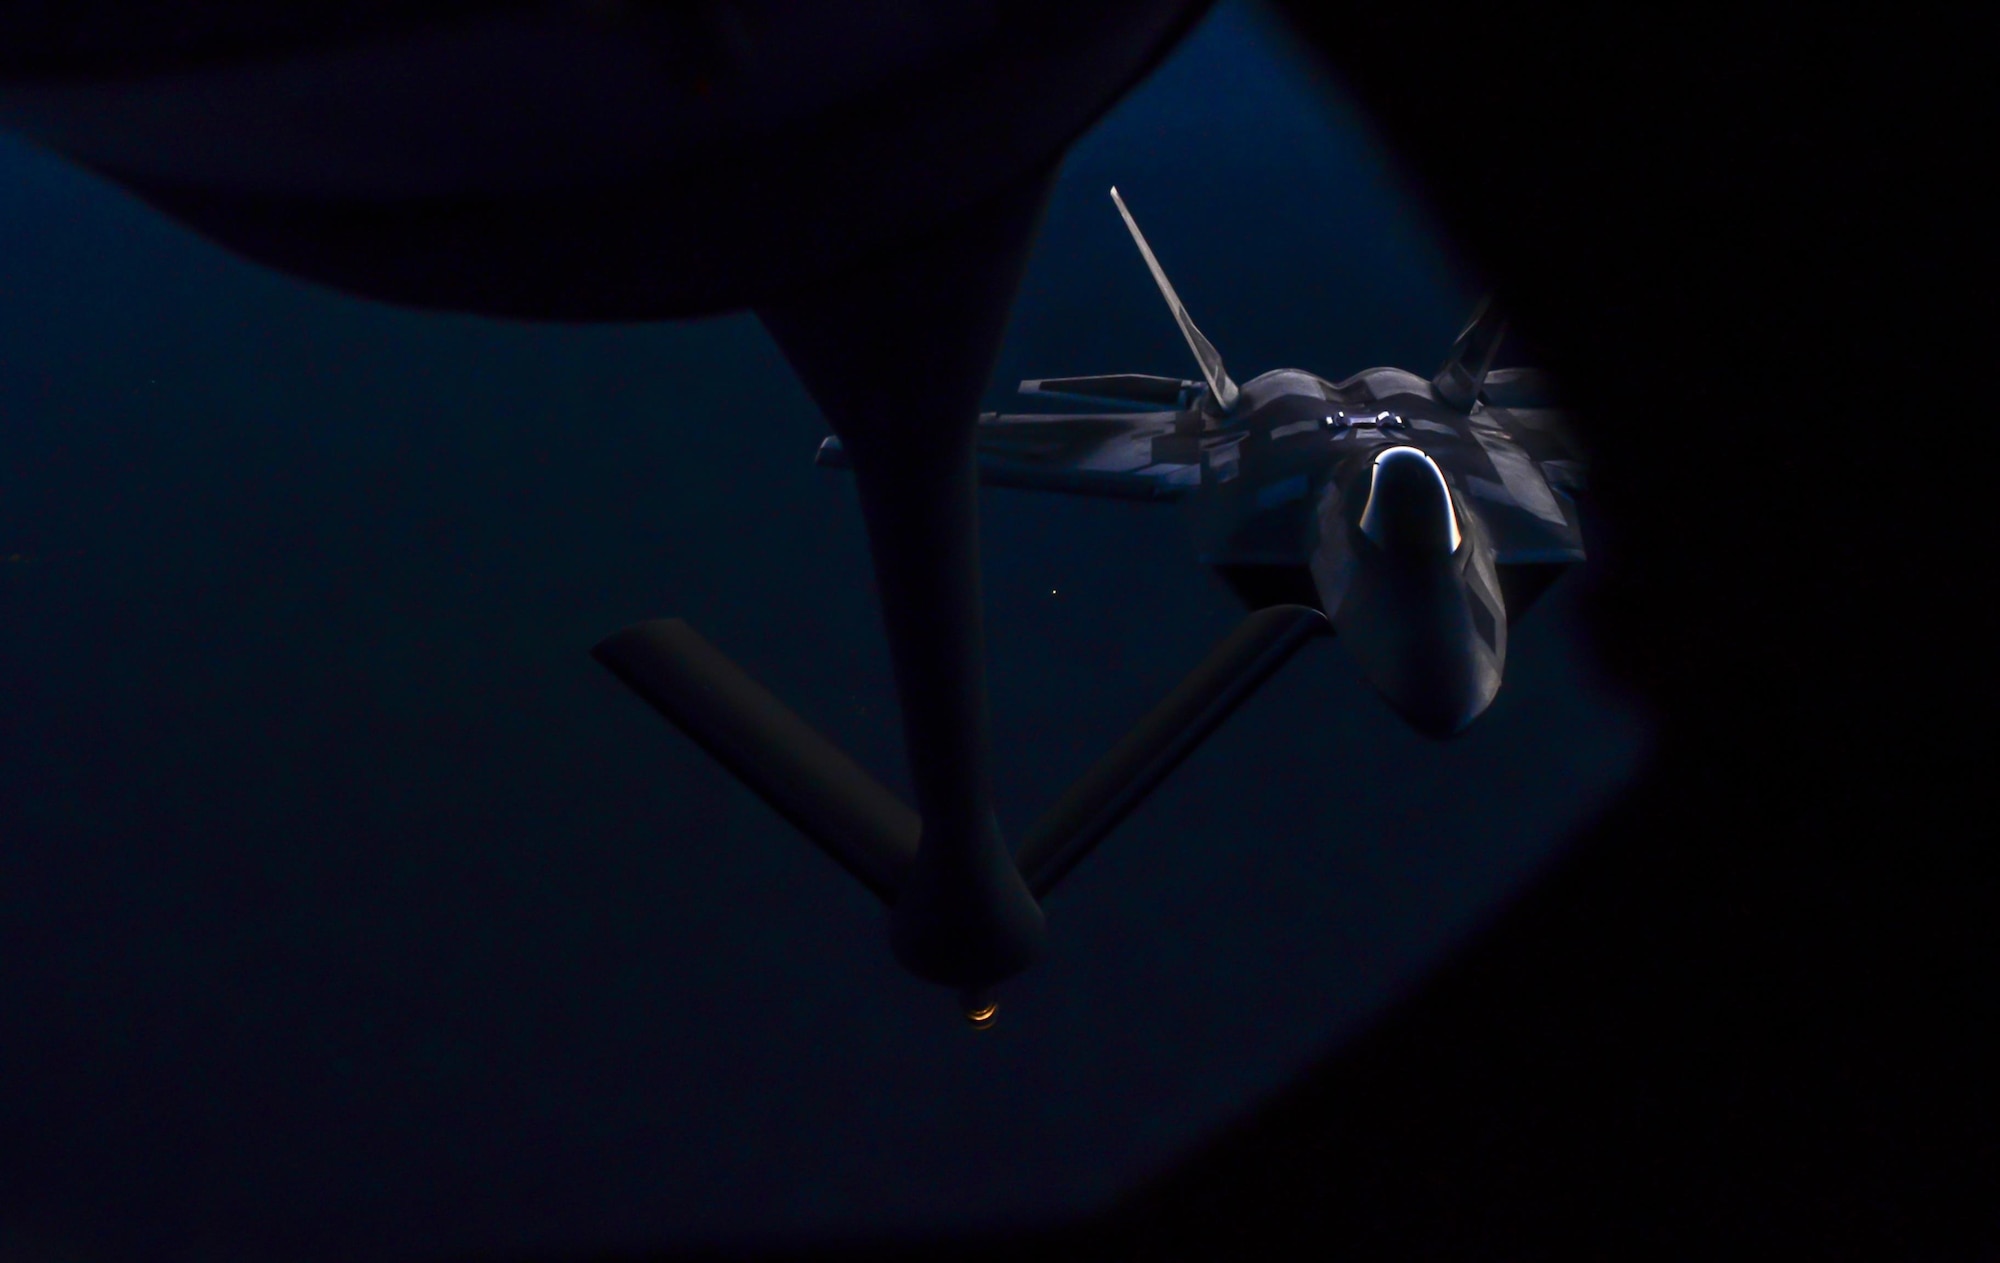 An F-22 Raptor, assigned to the 433rd Weapons Squadron, Nellis Air Force Base, Nev., prepares to be refueled during Deliberate Strike Night over the Nevada Test and Training Range, June 16, 2016. This focus makes DSN a distinctive part of Advanced Integration and the unique training of the select Airmen who earn the coveted Weapons School patch and who ensure the air superiority of the United States Air Force. (U.S. Air Force photo by Airman 1st Class Kevin Tanenbaum)